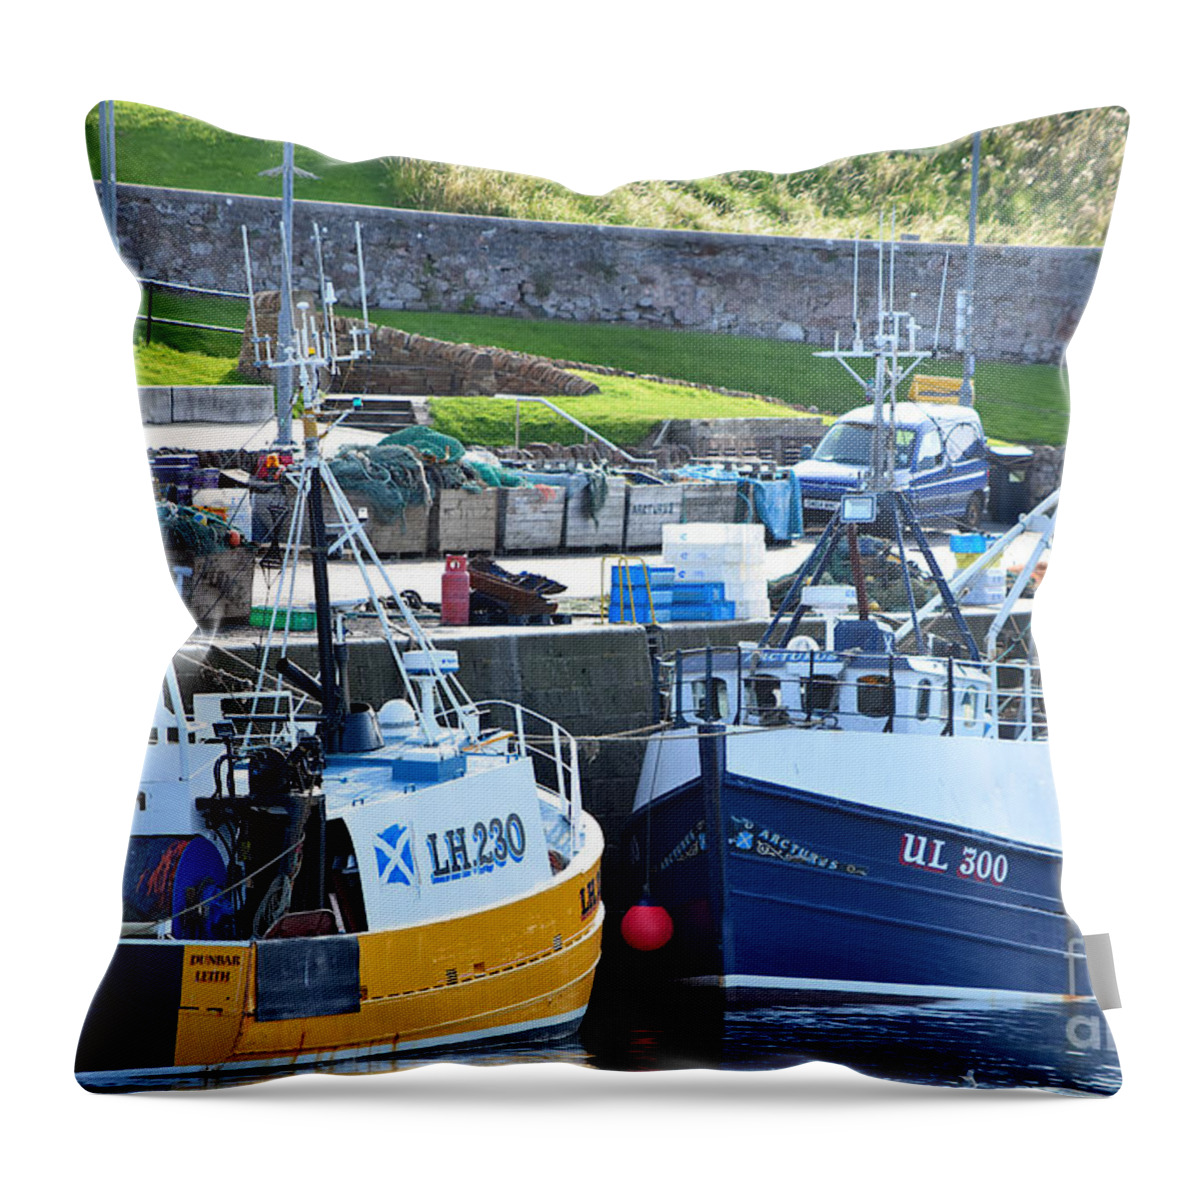 Scotland Throw Pillow featuring the photograph Victoria Harbour Dunbar by Yvonne Johnstone